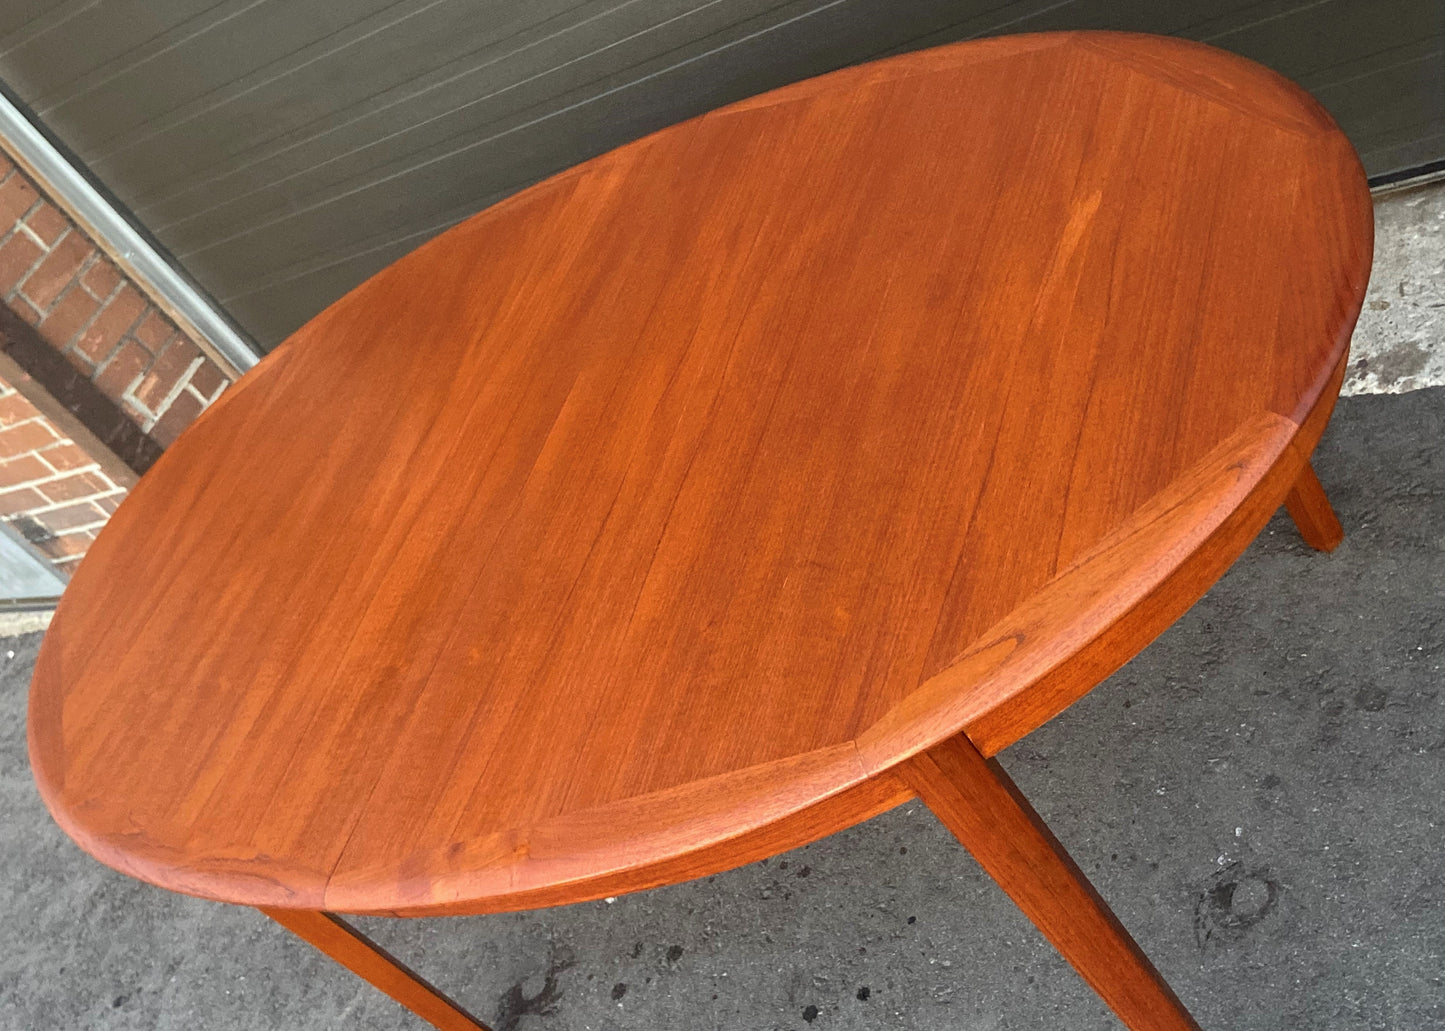 REFINISHED Danish MCM Teak Dining Table w 2 Leaves by A.H.Olsen, PERFECT, 64" - 103"